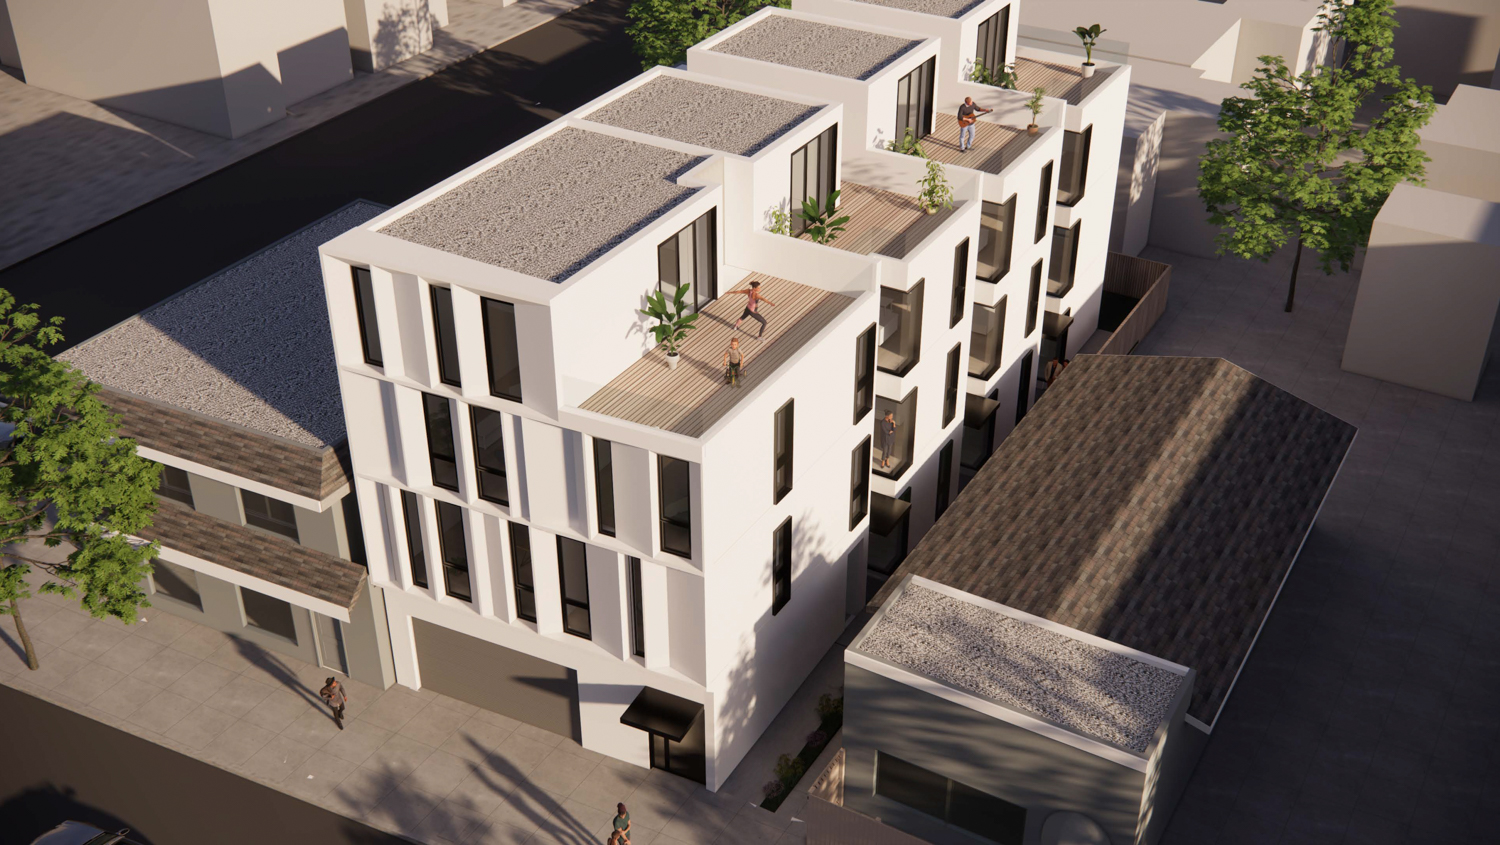 2727 San Pablo Avenue aerial view of the terraces, rendering by Moment X